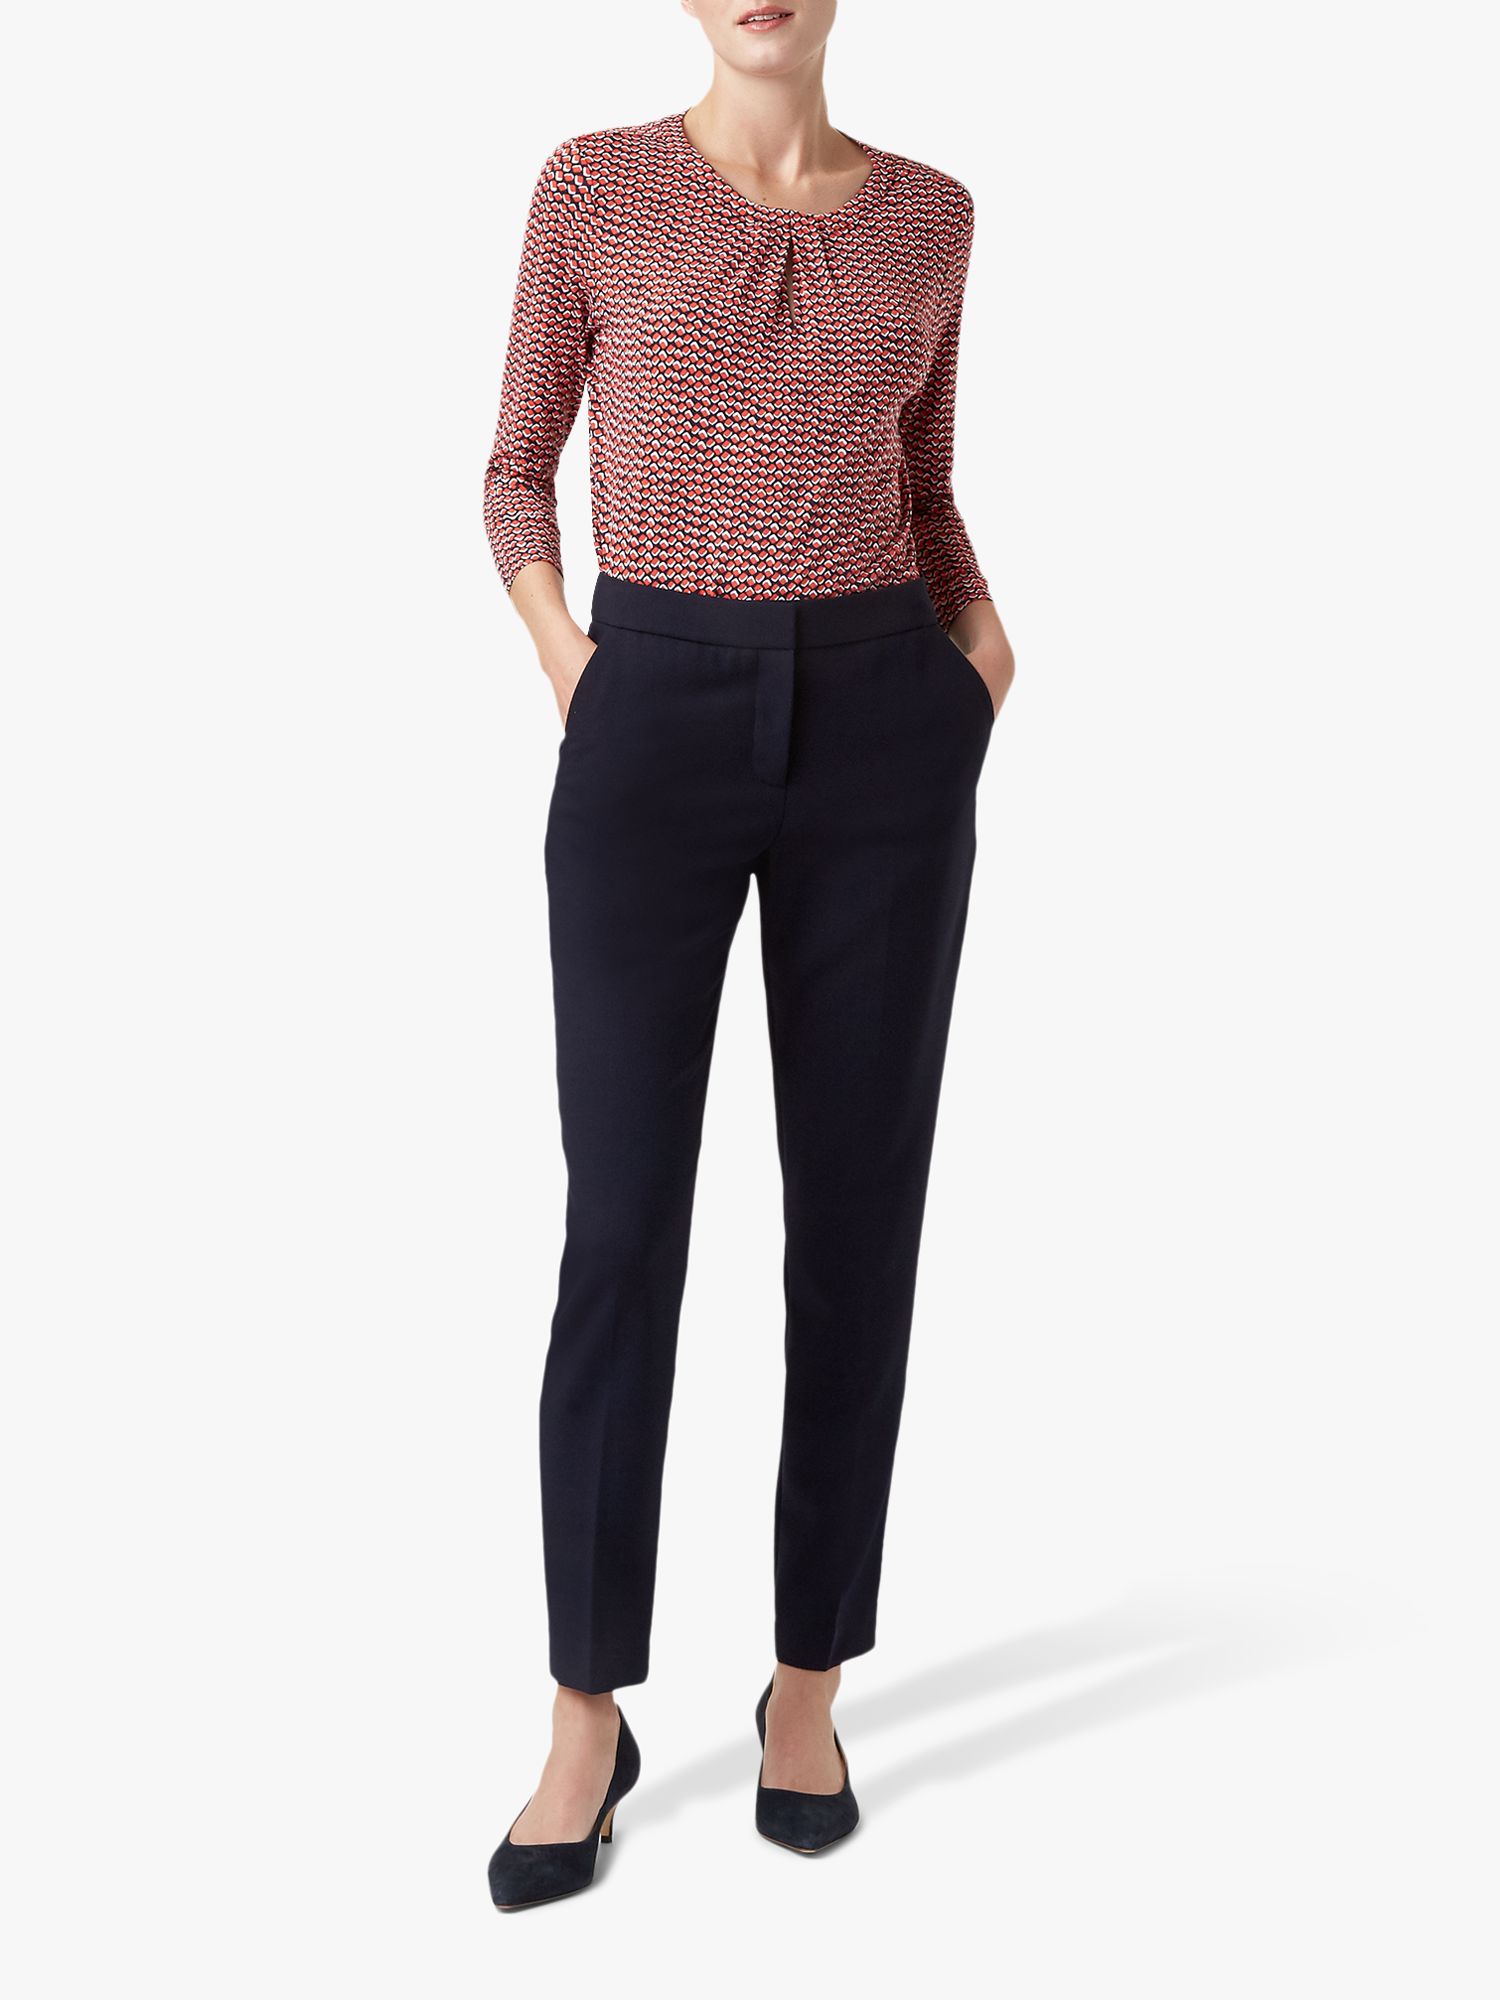 Hobbs Gael Tapered Trousers